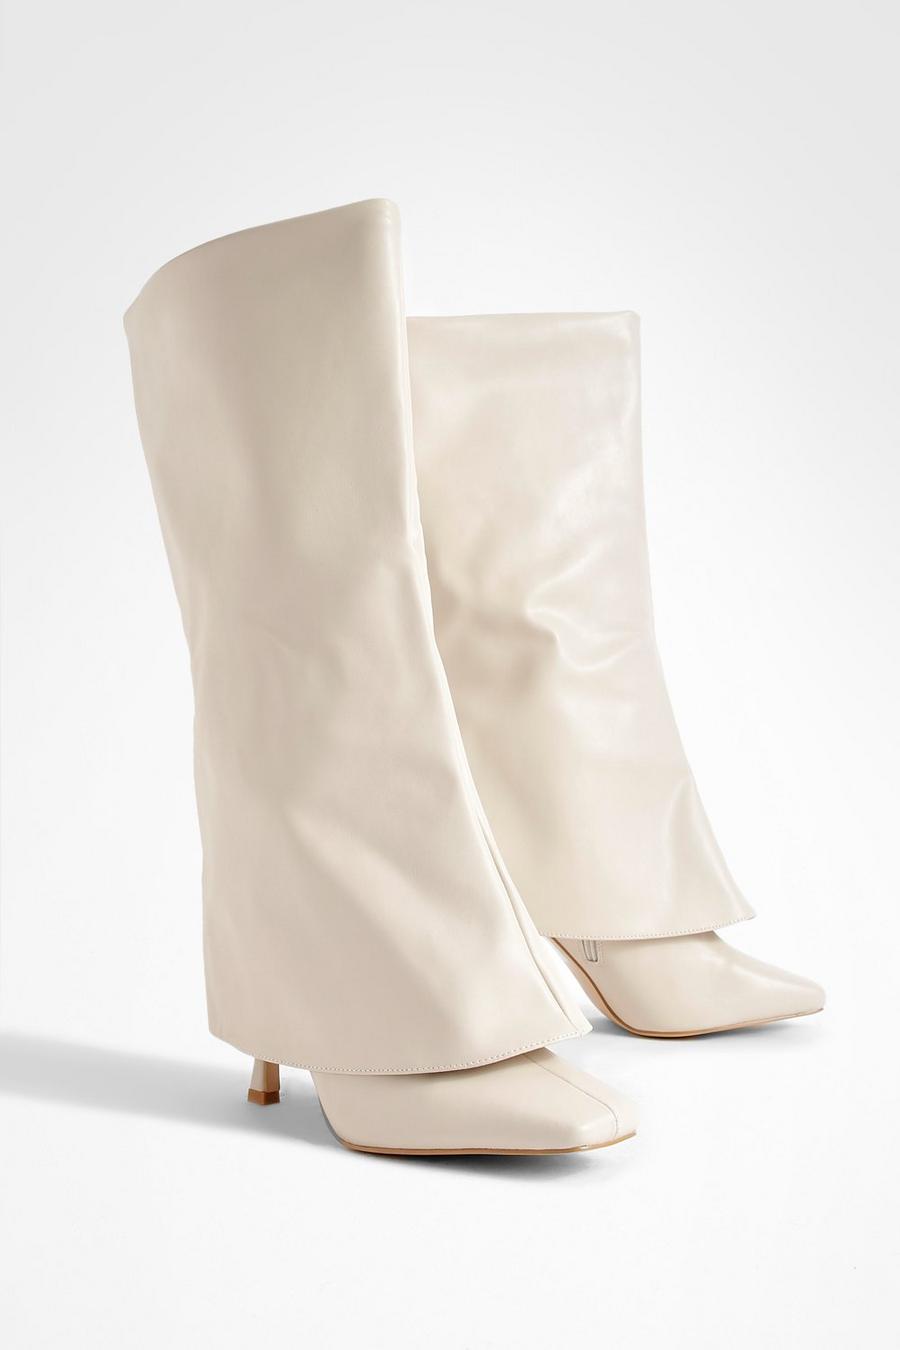 Cream Wide Width Square Toe Foldover Boots image number 1